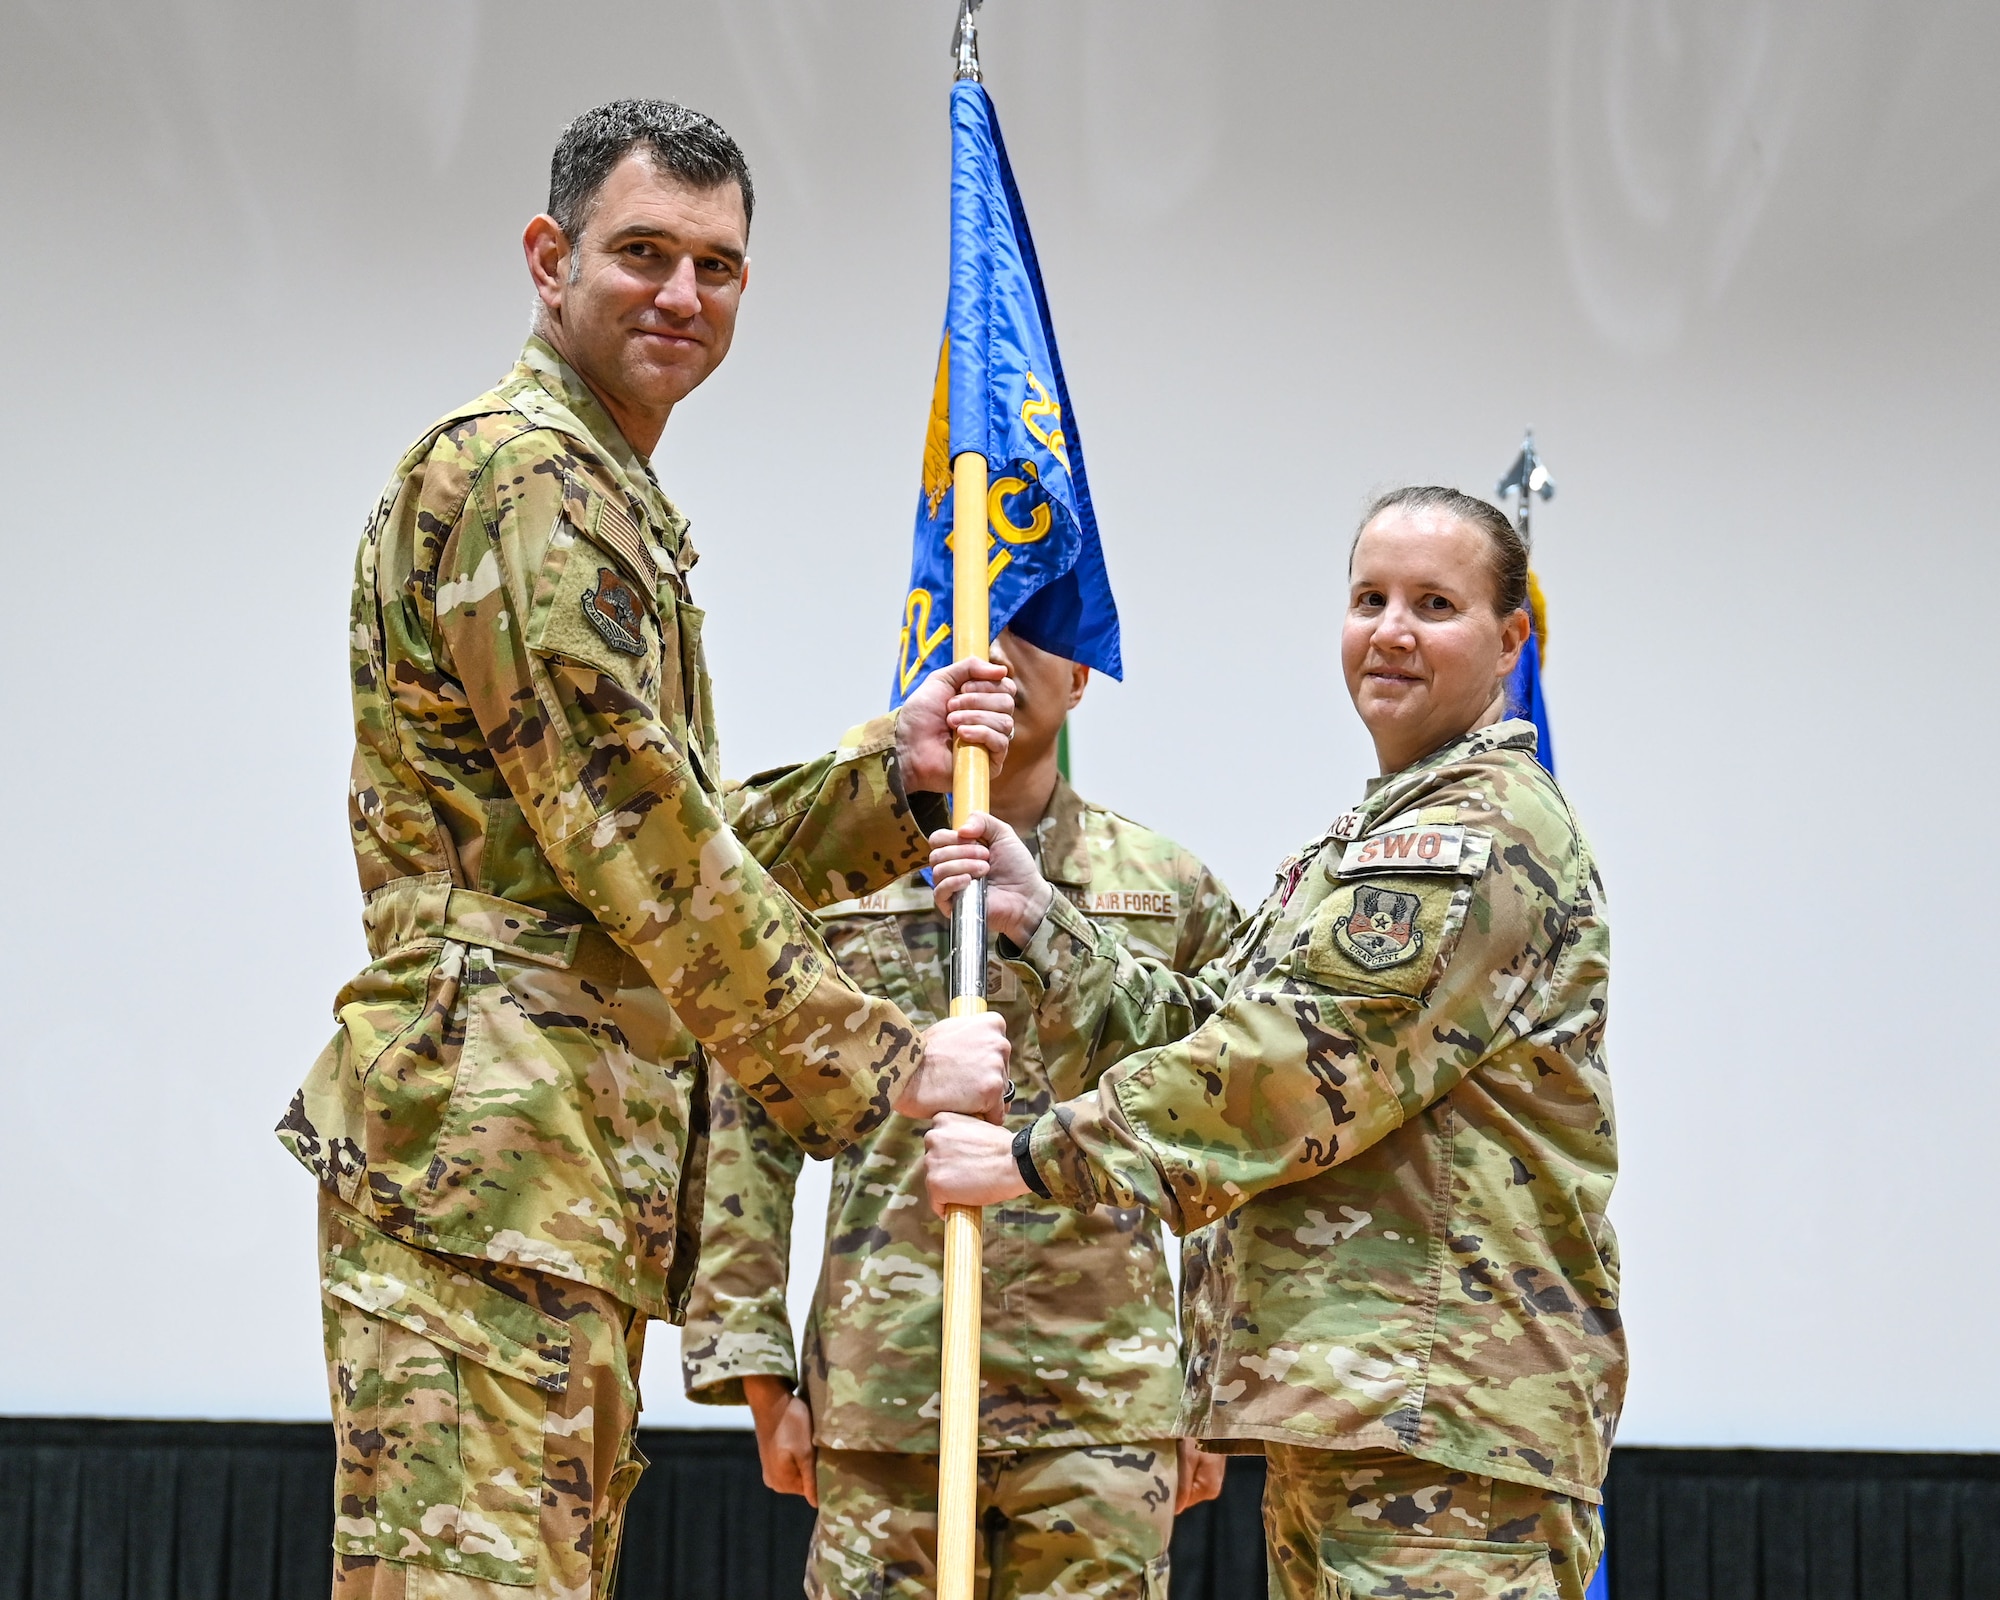 Lt. Col. Mindy Pearson, outgoing 22nd Expeditionary Combat Weather Squadron commander, passes the guidon to Col. Jeremy Ponn, 387th Air Expeditionary Group commander, during a change of command ceremony at Ali Al Salem Air Base, Kuwait, June 7, 2023. Pearson passed the guidon back to Ponn as a symbol of relinquishing command of the unit. (U.S. Air Force photo by Staff Sgt. Breanna Diaz)